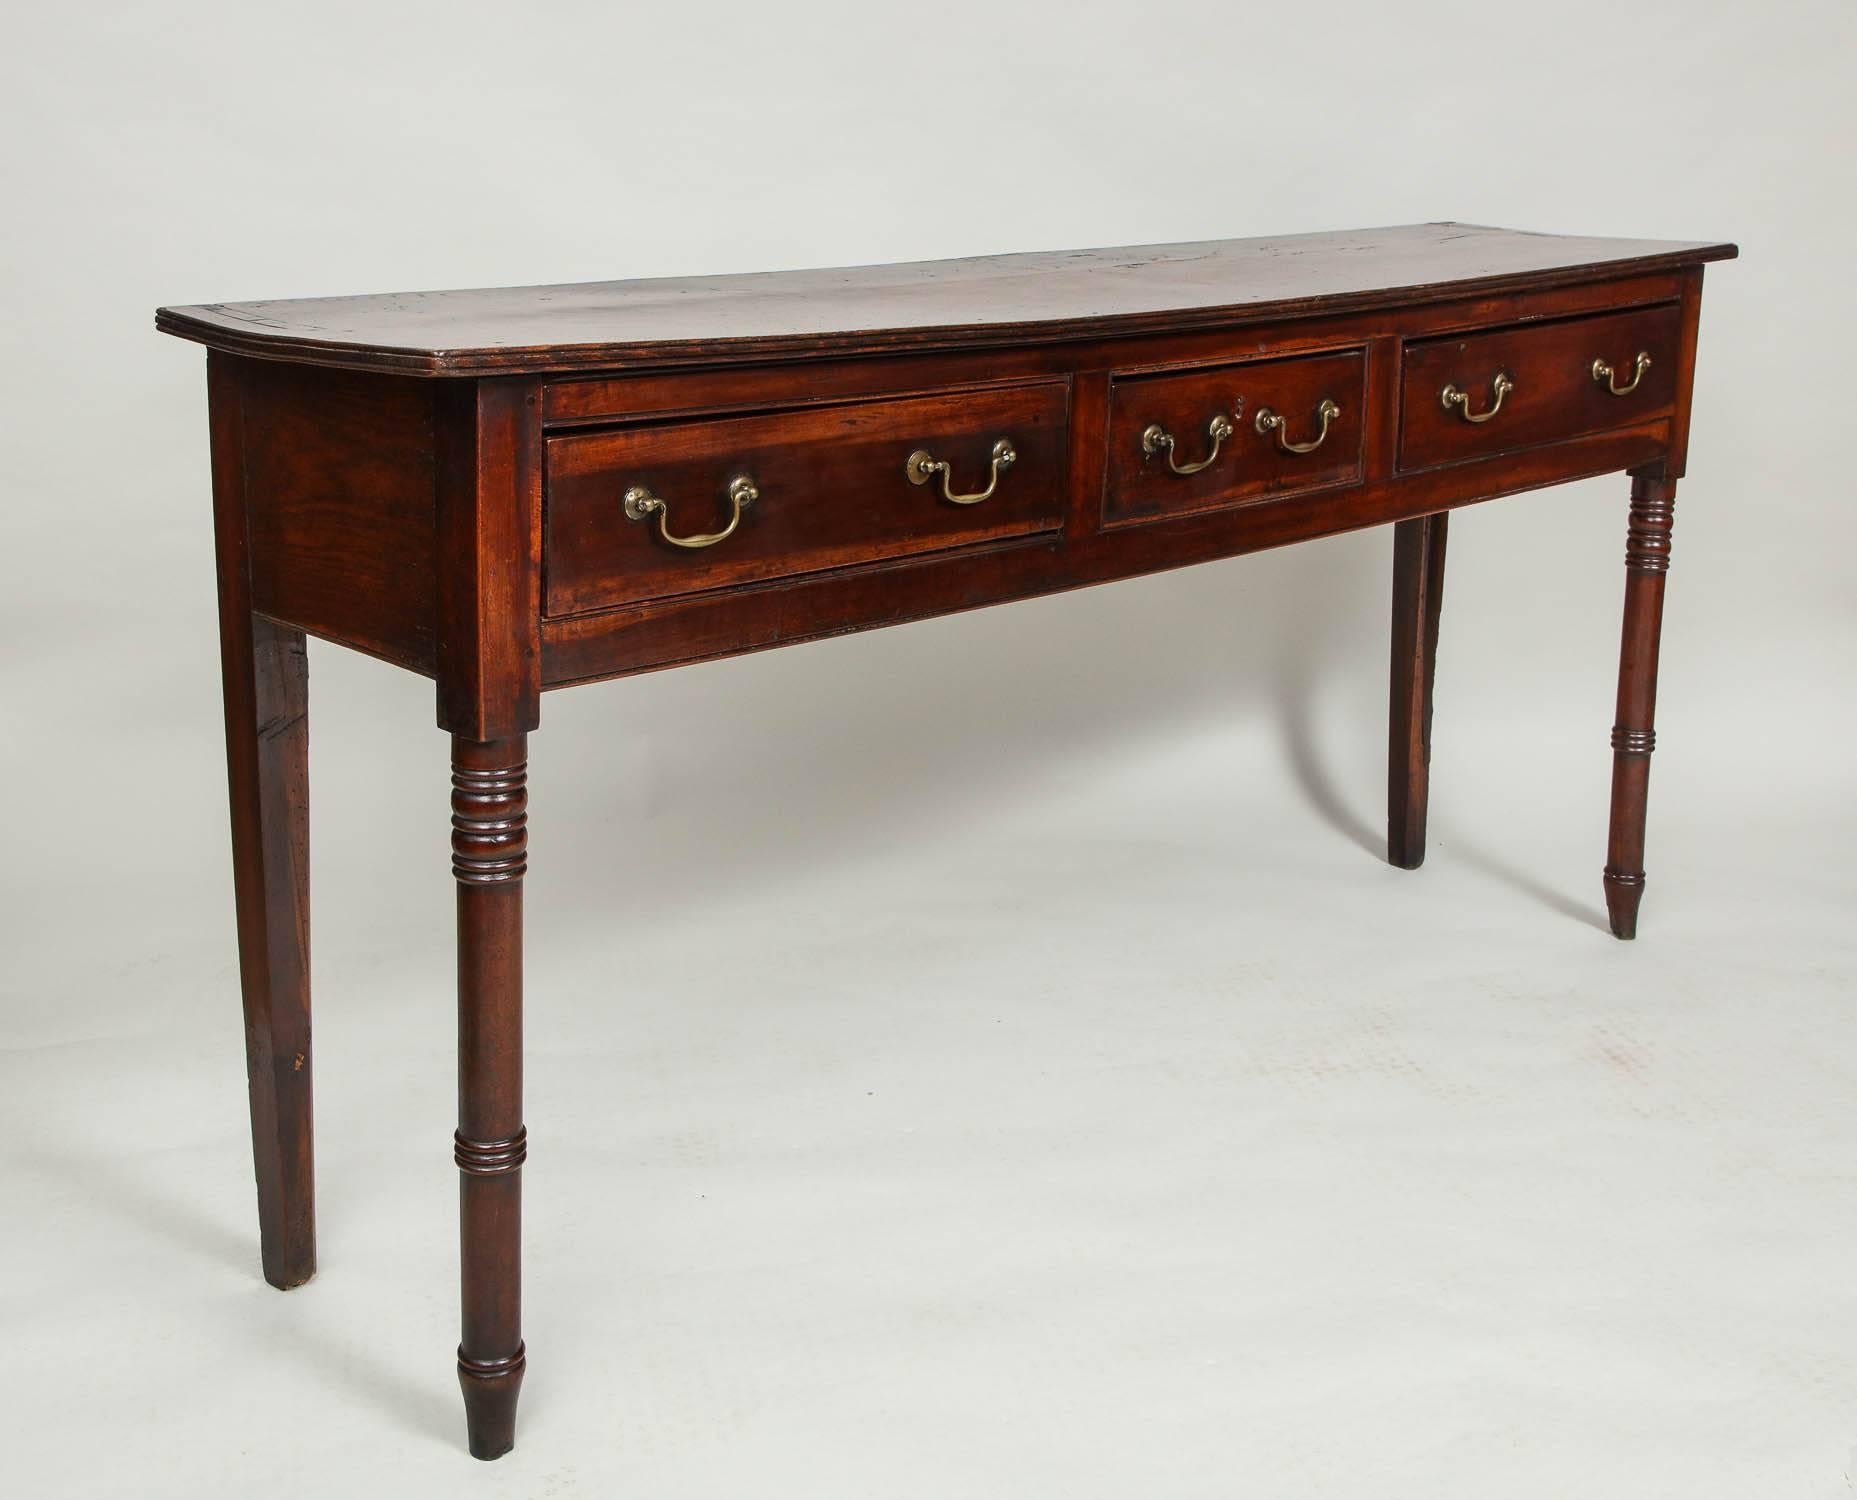 Fine early 19th century elm and fruitwood hunt board, the elm plank top with simple molded edge, over two wide and one thinner central drawer with plumwood drawer fronts having original swan neck pulls, standing on ring turned tapered front legs and